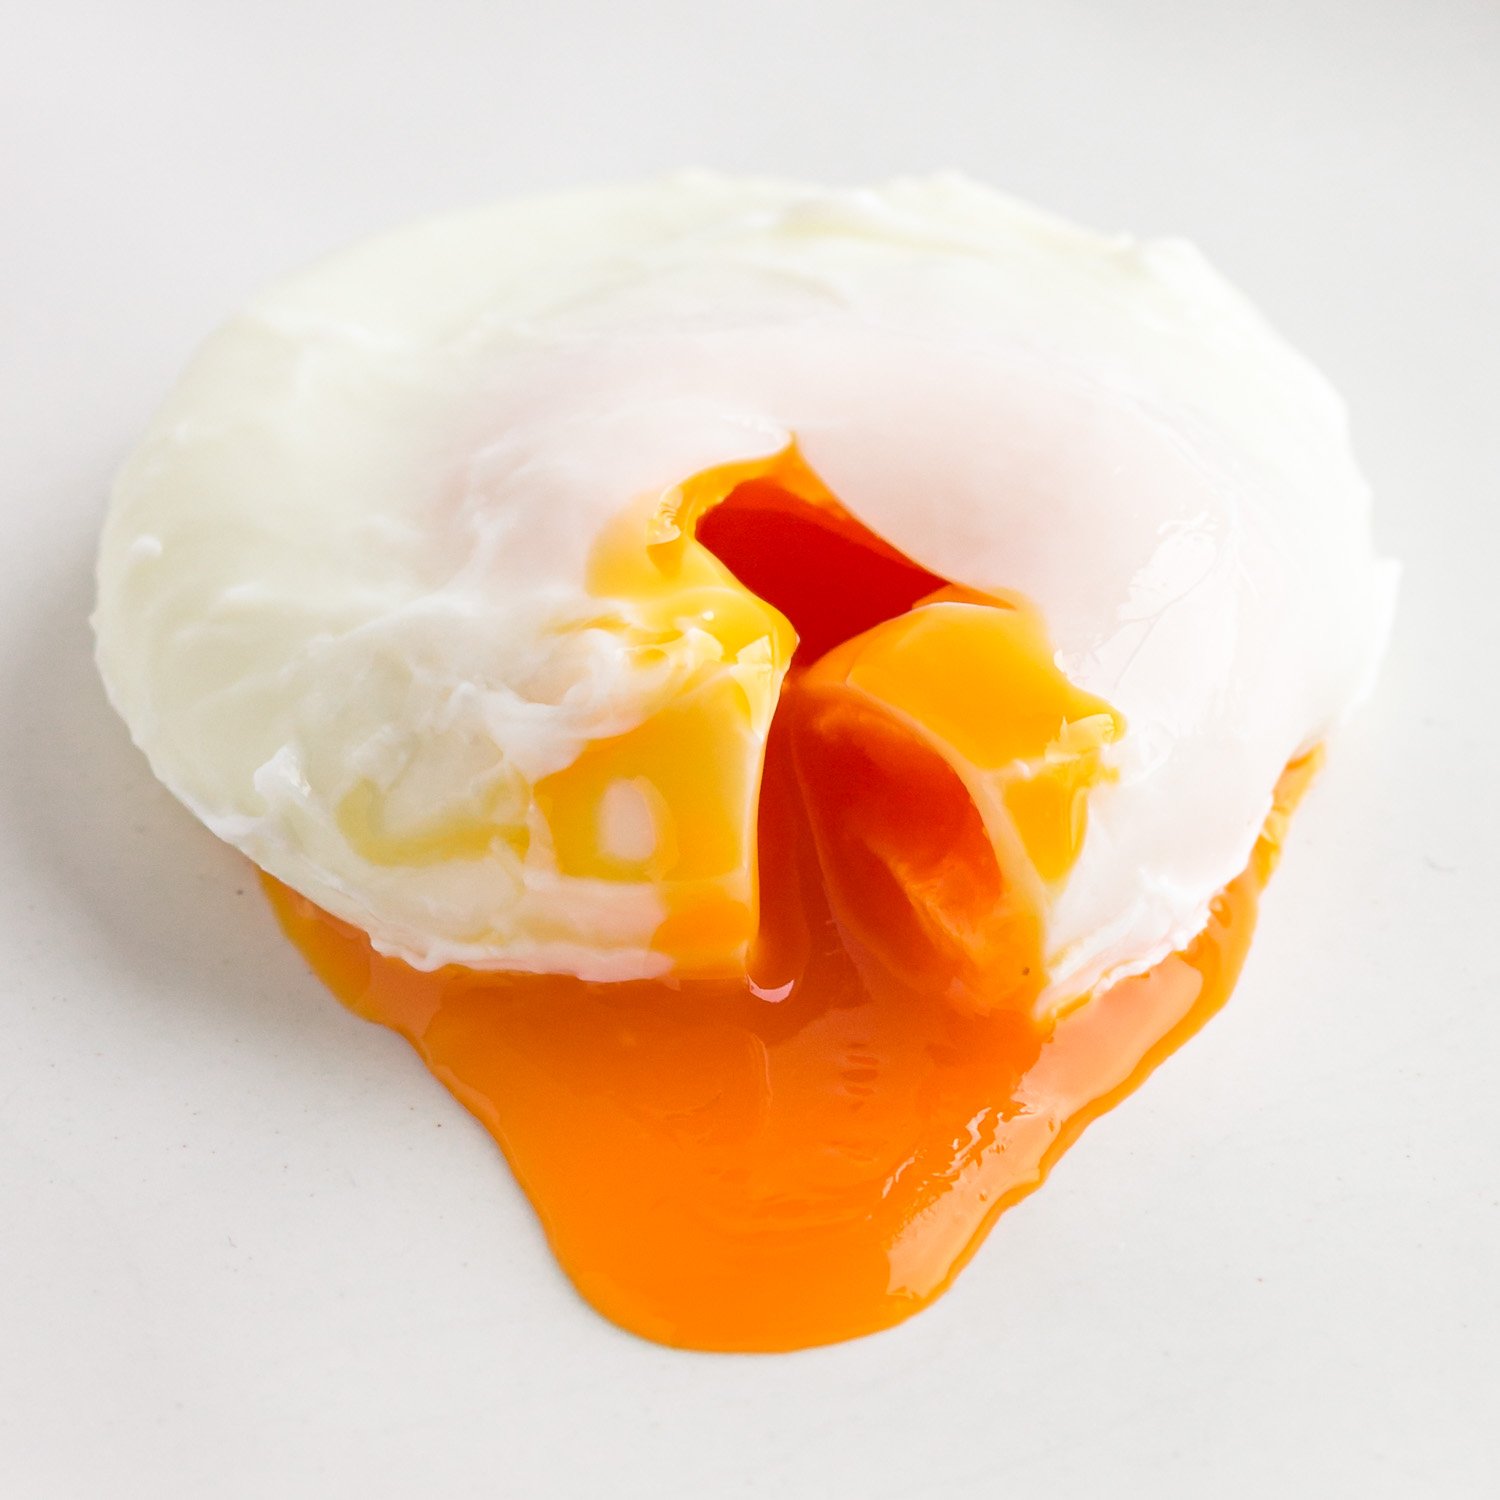 Closeup of a poached egg that has been cut into to release the golden, runny yolk.